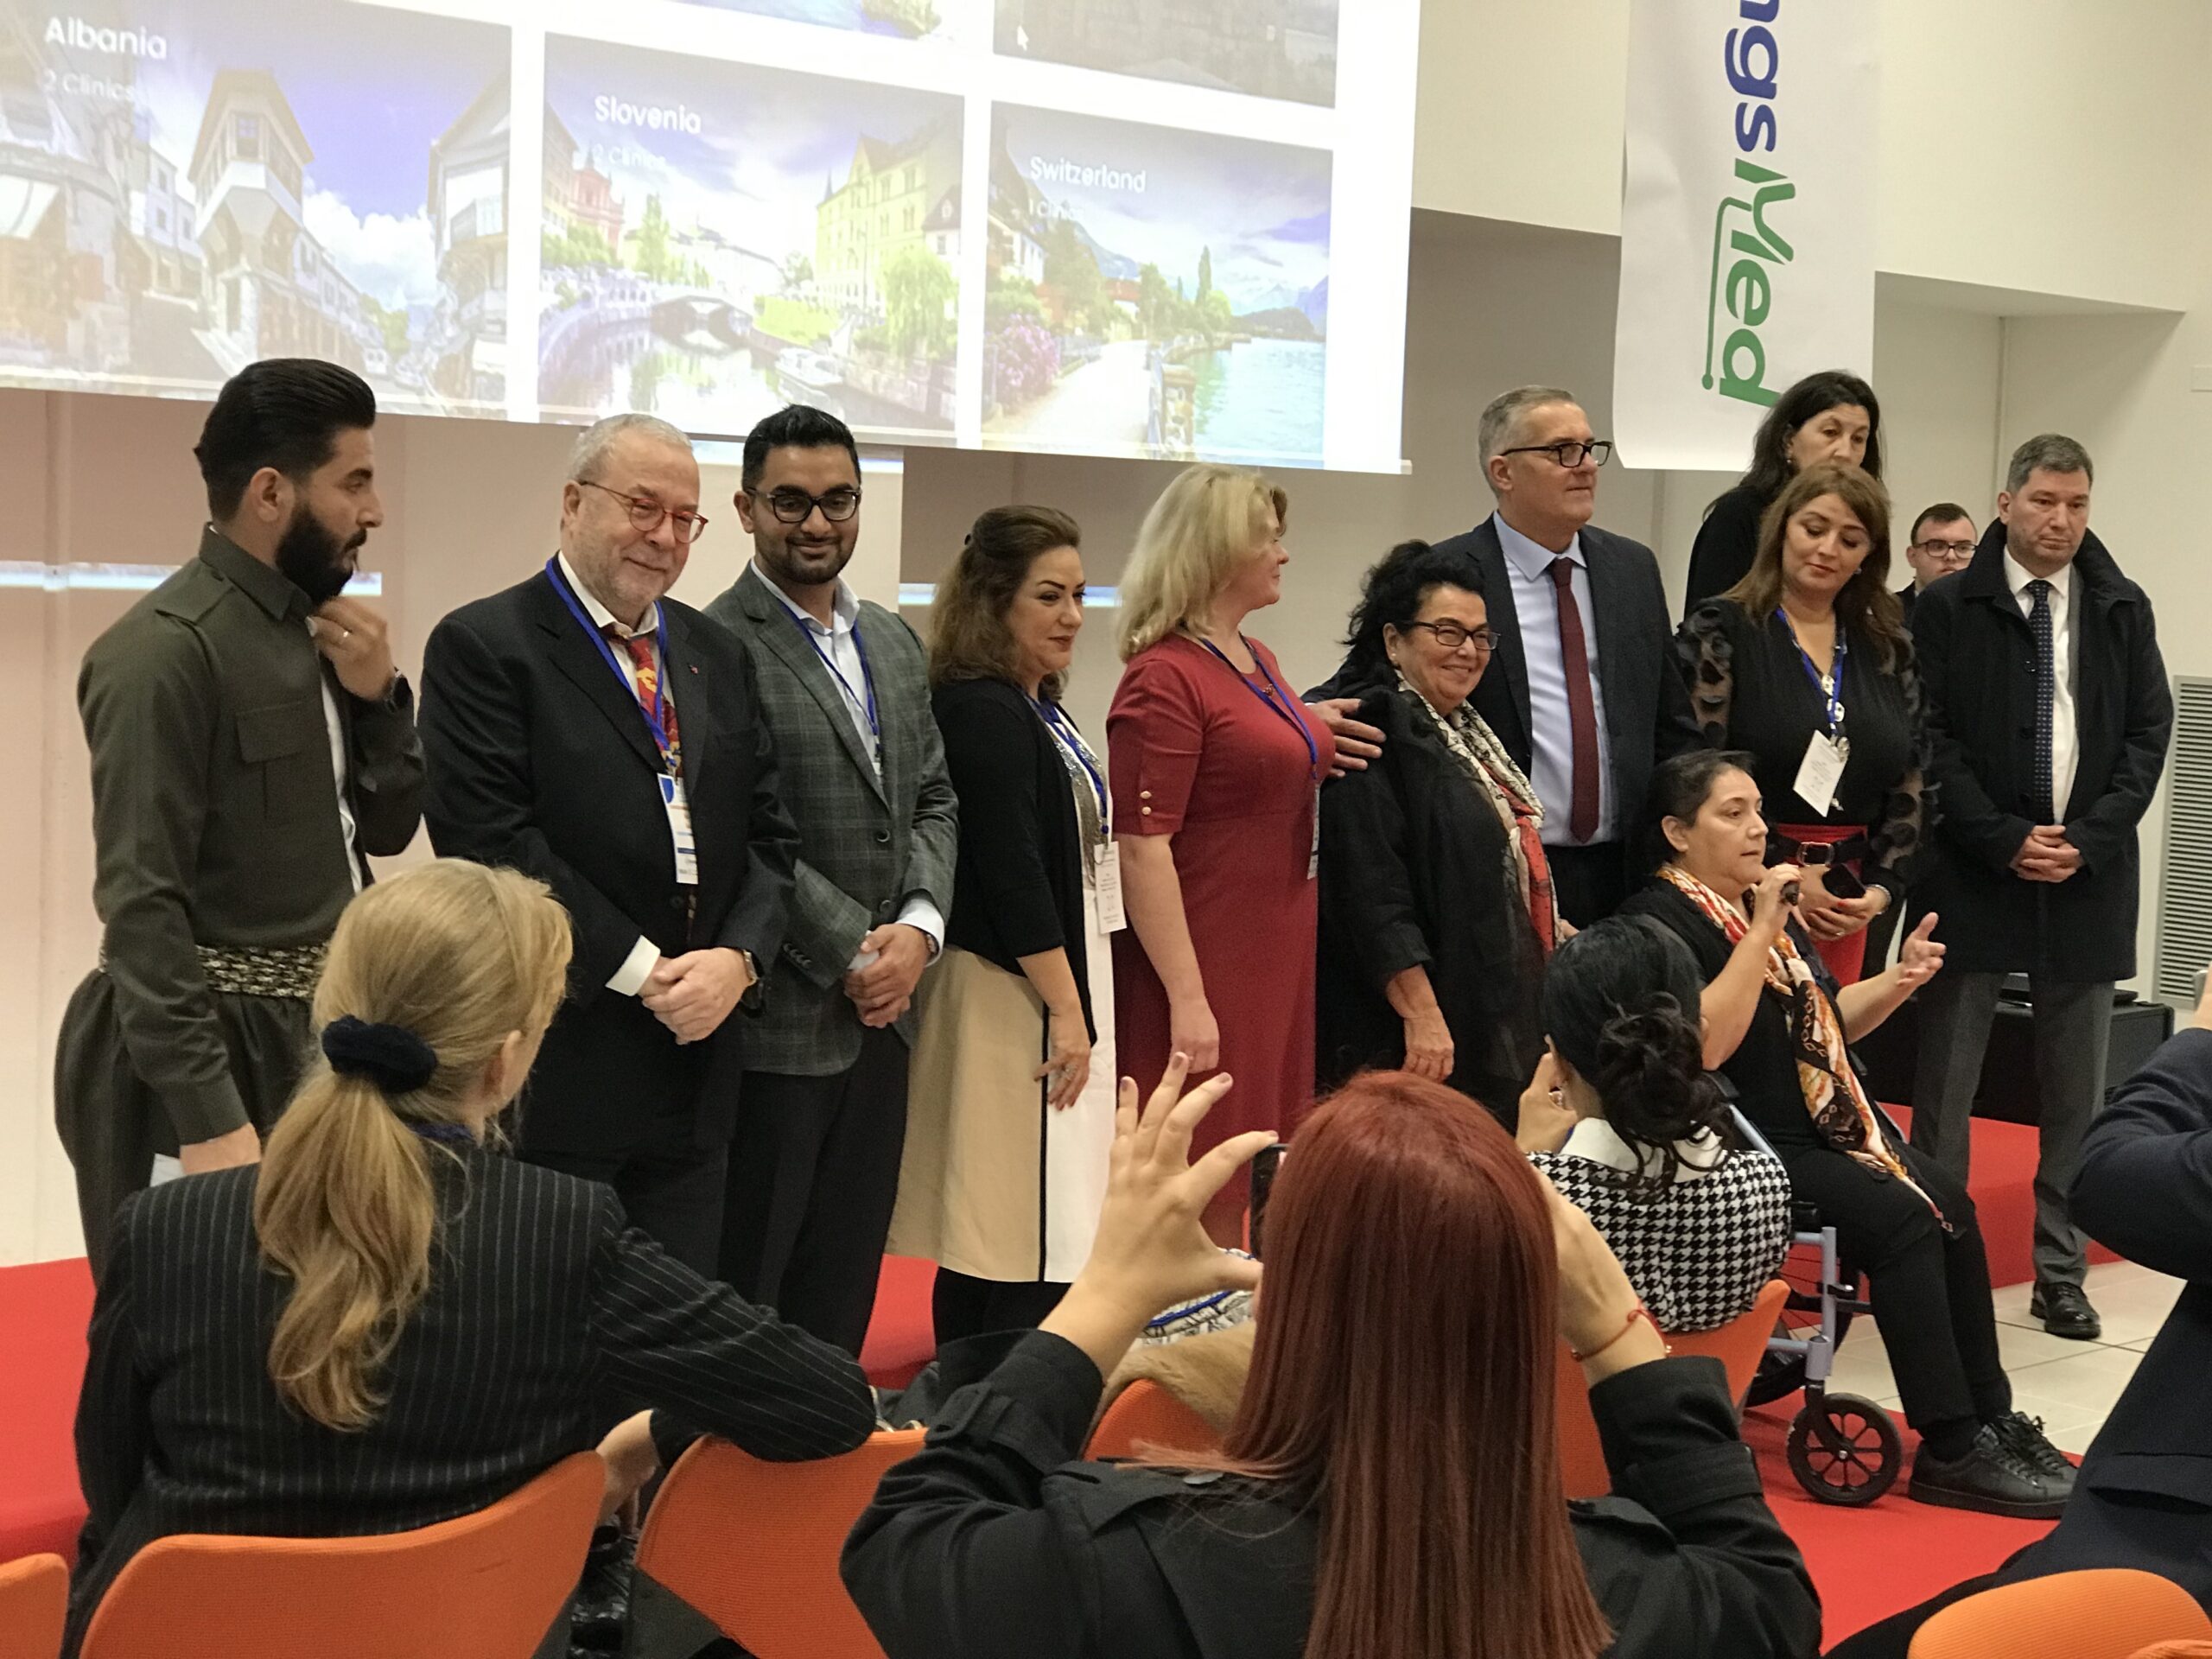 Visual Report on the Opening of EMT2023-A Lens into Day One of the European Medical Tourism Exhibition in Italy